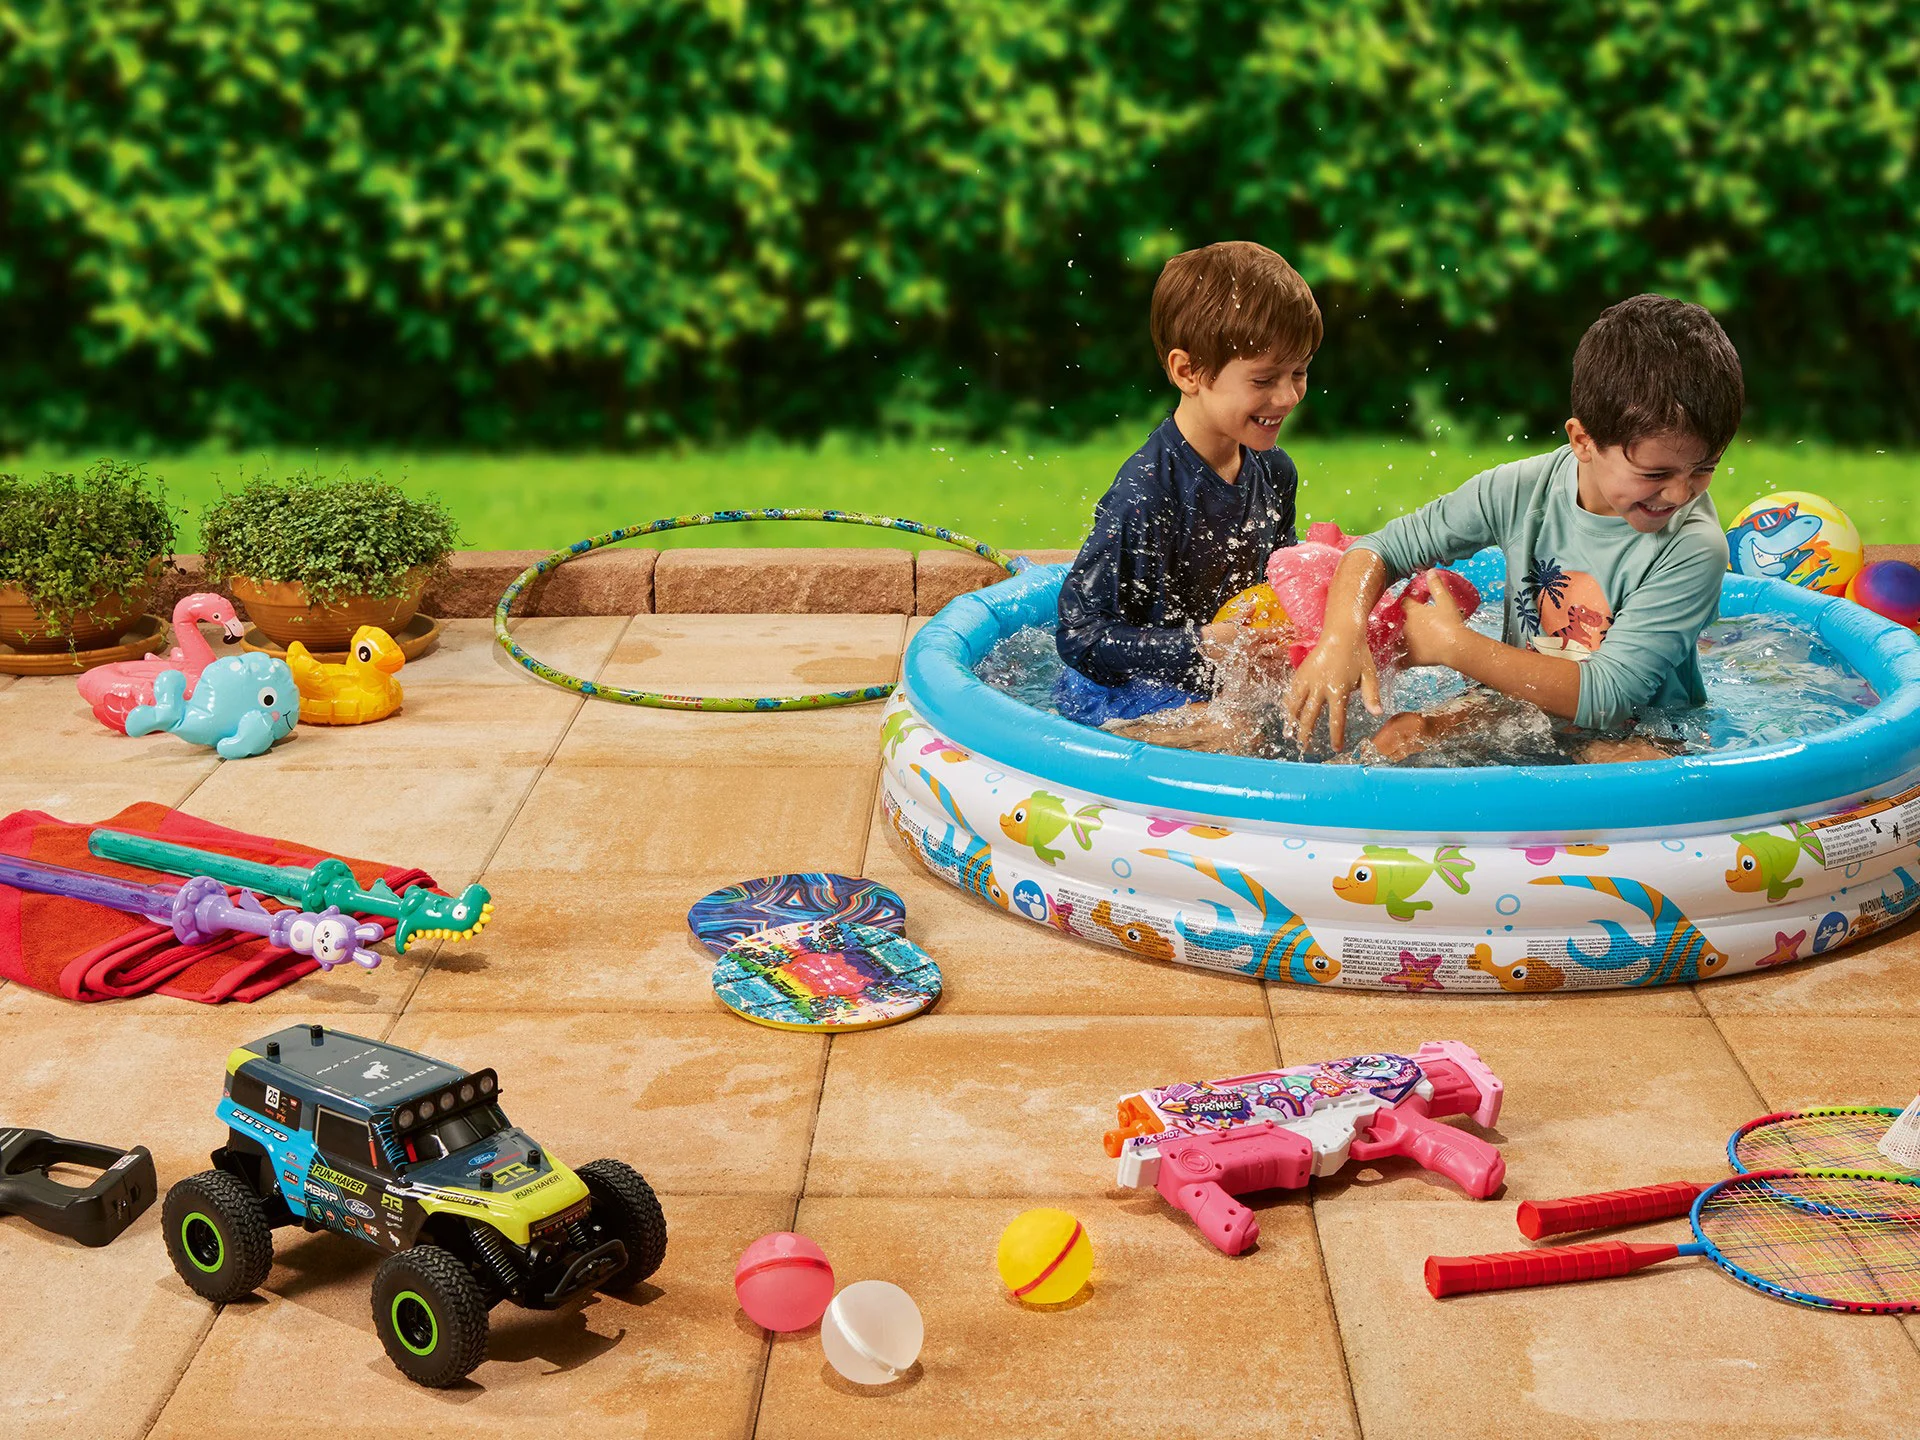 Two boys playing in a paddling pool